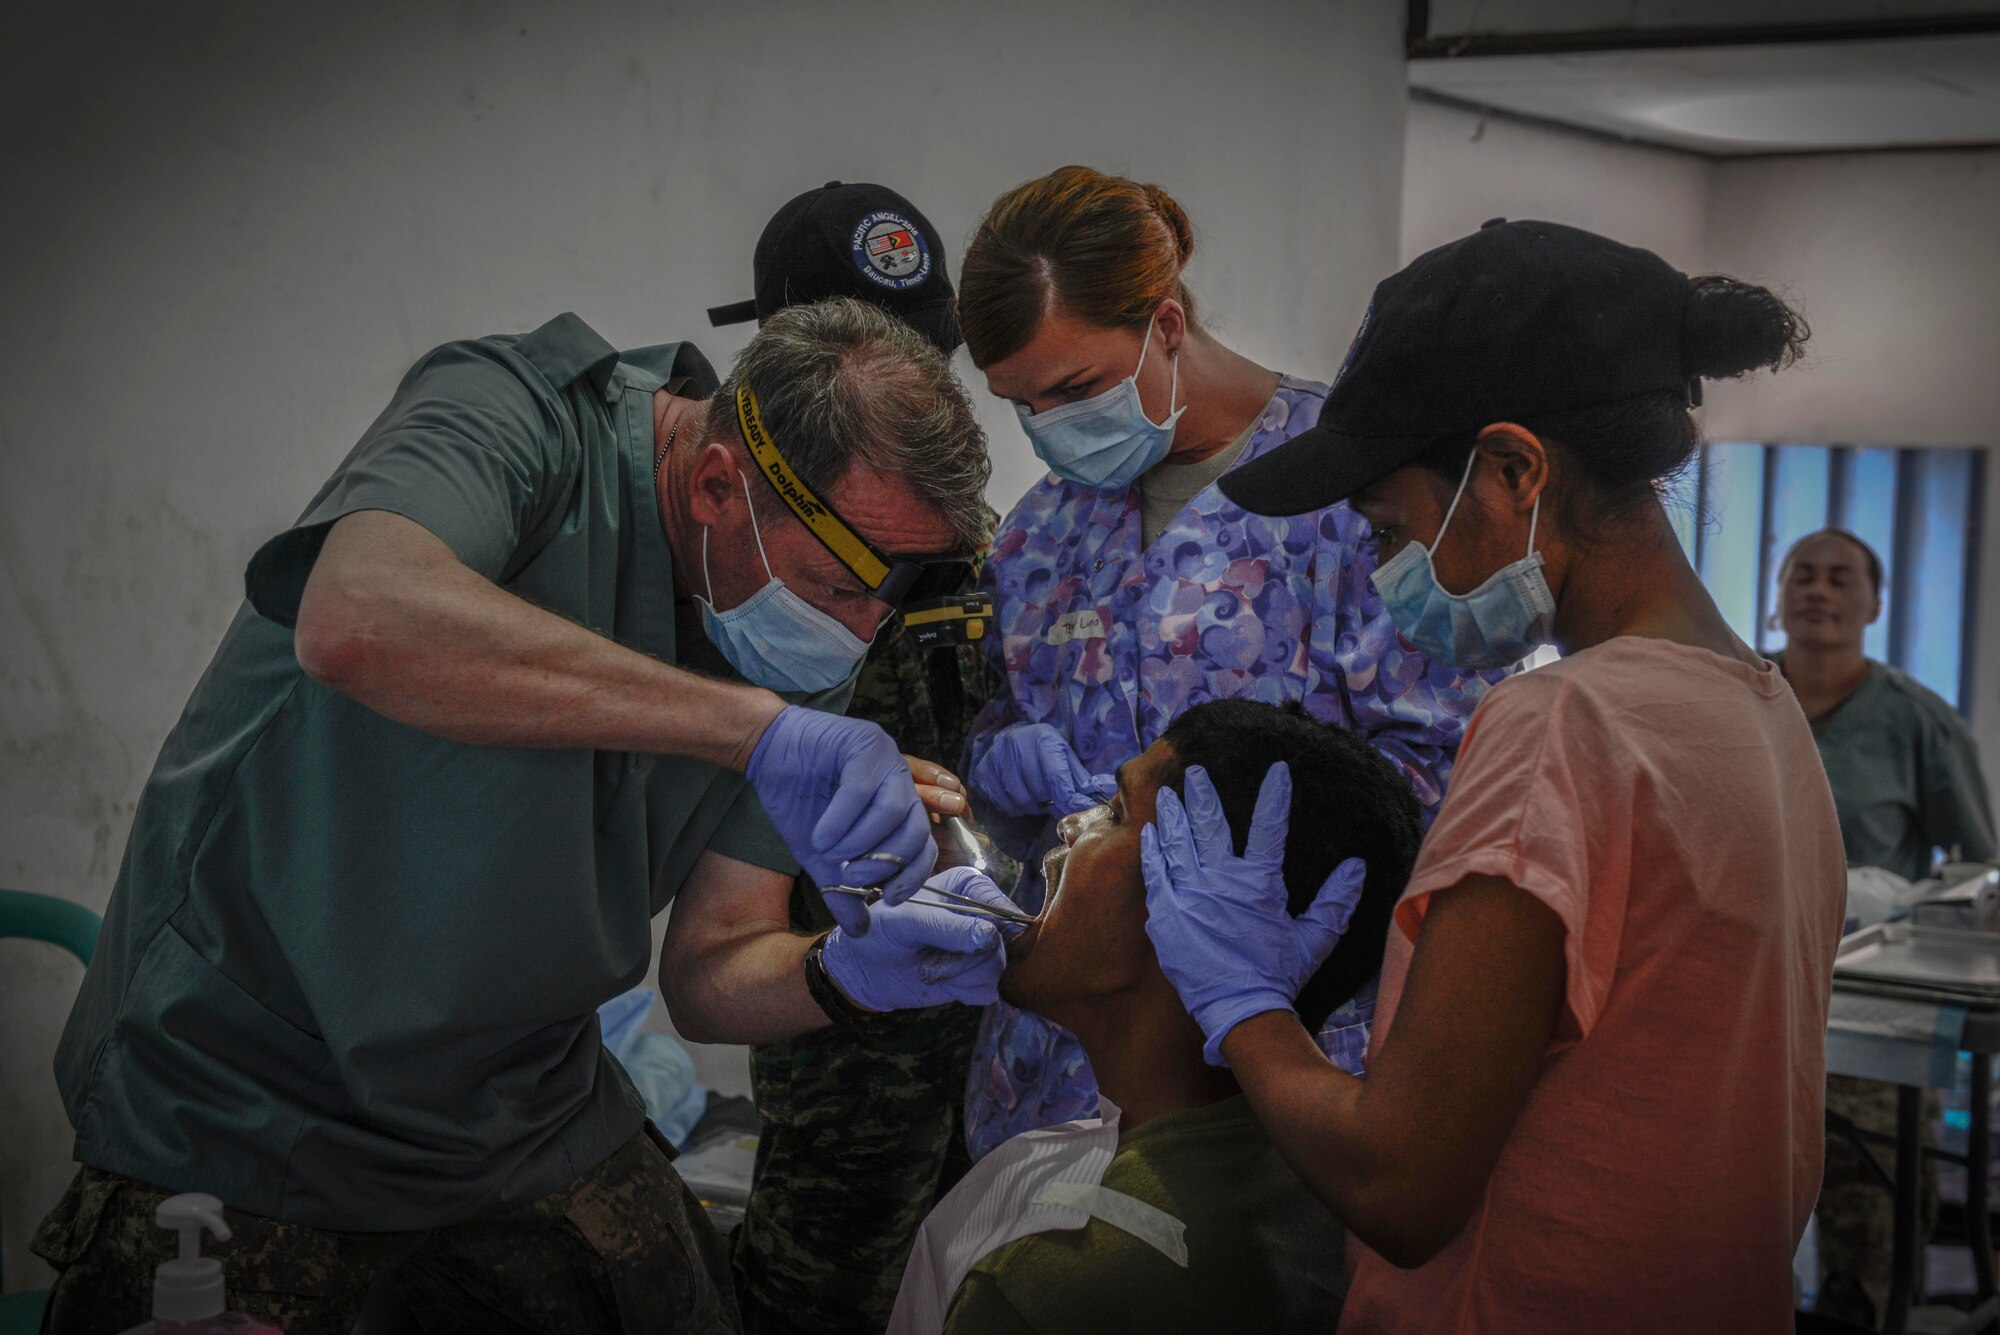 New Zealand Defense Force Maj. Phil Worthington, northern region dental commander, extracts a tooth with the help of U.S. Air Force and Timorese service members during an Operation Pacific Angel 15-2 health services outreach event Sept. 7, 2015, in Baucau, Timor-Leste. Pacific Angel is a multilateral humanitarian assistance civil military operation, which improves military-to-military partnerships in the Pacific while also providing medical health outreach, civic engineering projects and subject matter exchanges among partner forces. (U.S. Air Force photo by Staff Sgt. Alexander W. Riedel/Released)